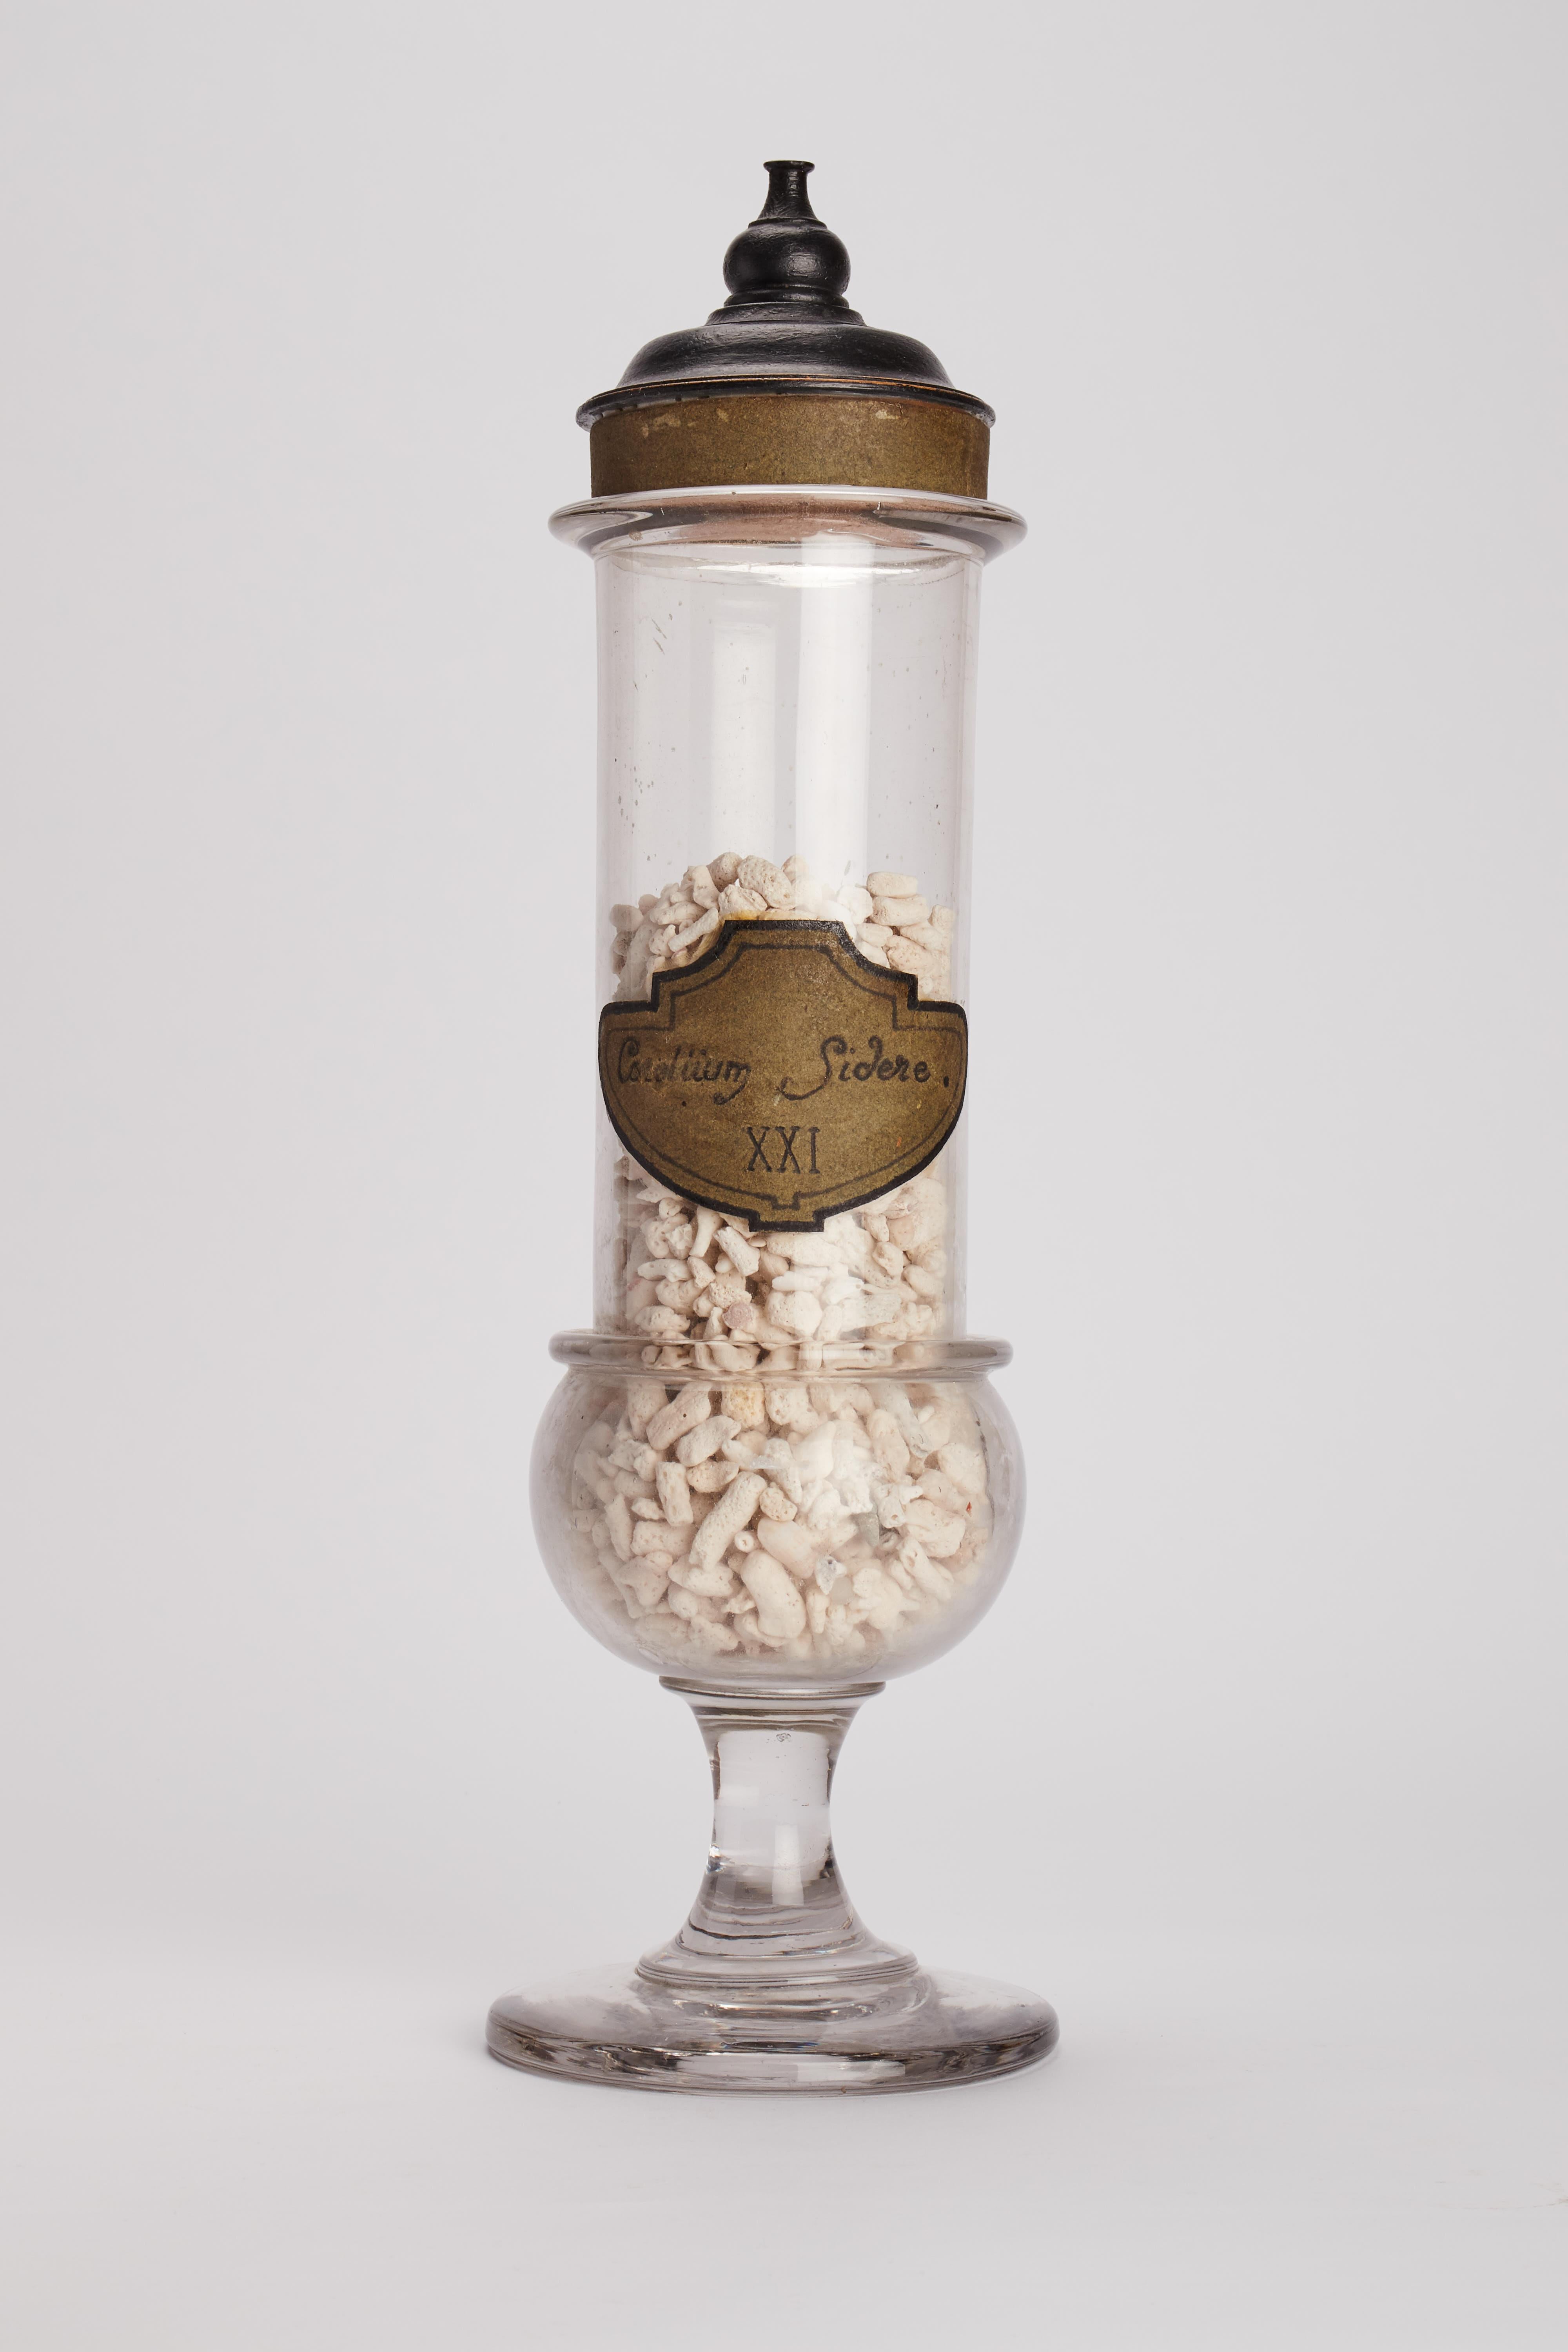 Specimen from wunderkammer, a glass ampoule with turned fruitwood lid painted black and label on the front. The paper label reads: Corallium Sidere and the number XXI. France circa 1870